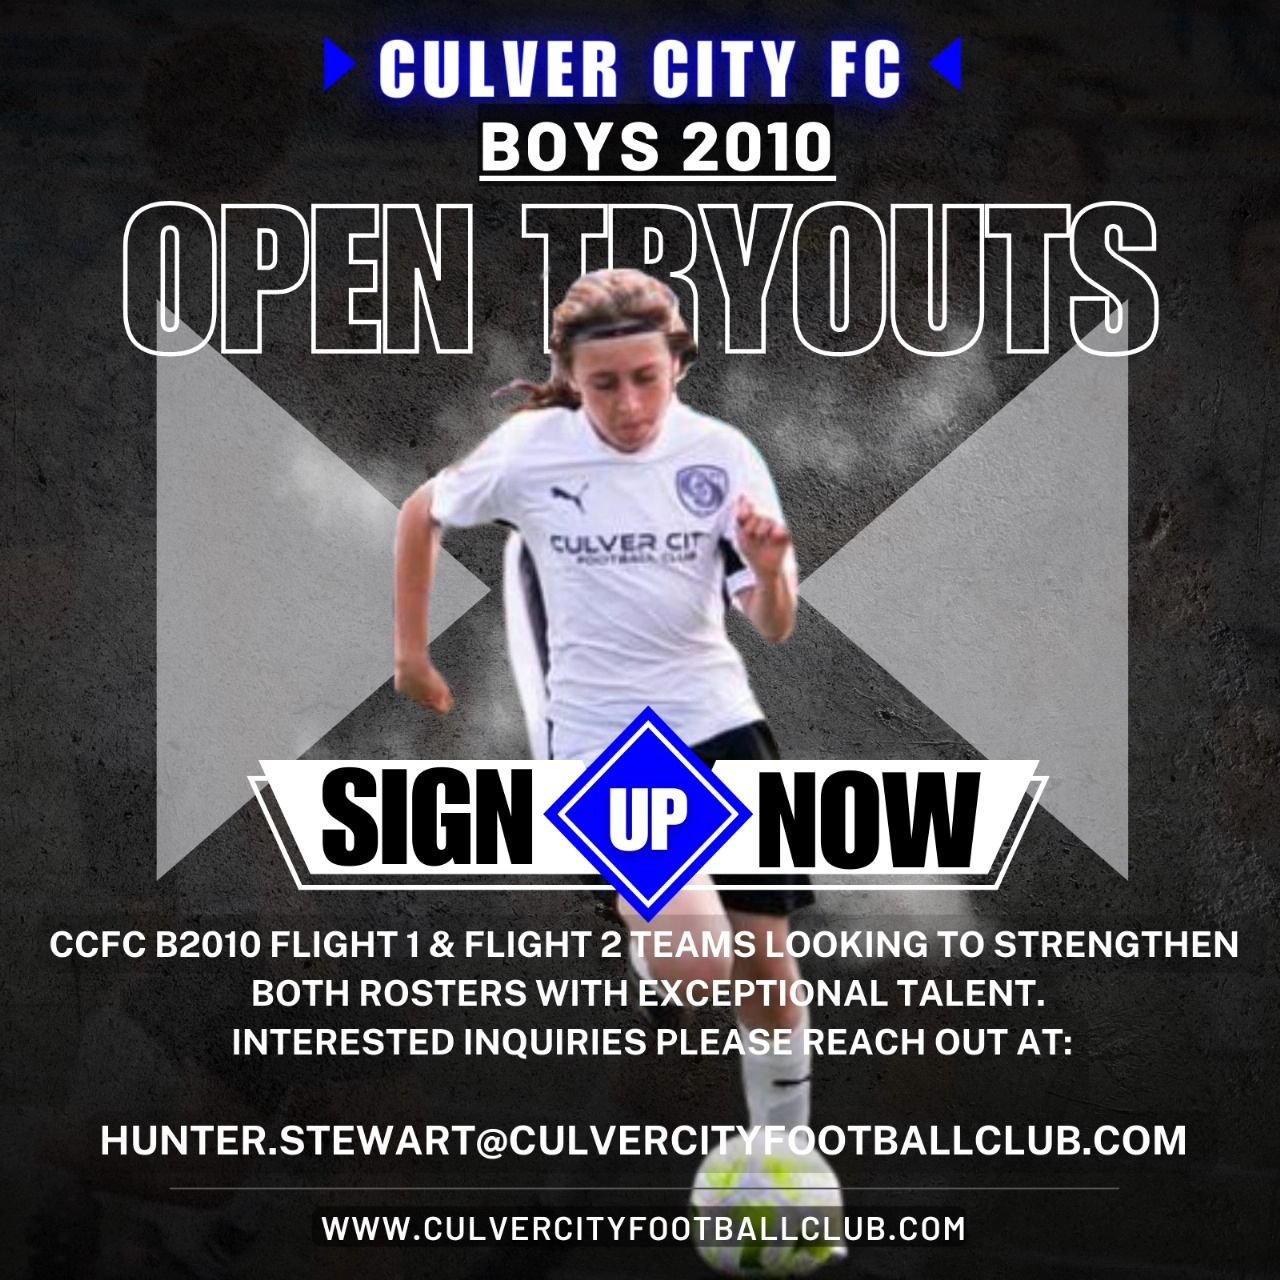 JOIN THE CCFC FAMILY! 

CCFC B2010 Flight 1 &amp; Flight 2 teams looking to strengthen both rosters with exceptional talent. Interested inquiries please reach out to Coach Hunter at hunter.stewart@culvercityfootballclub.com 

 ONE CLUB... ONE CITY...